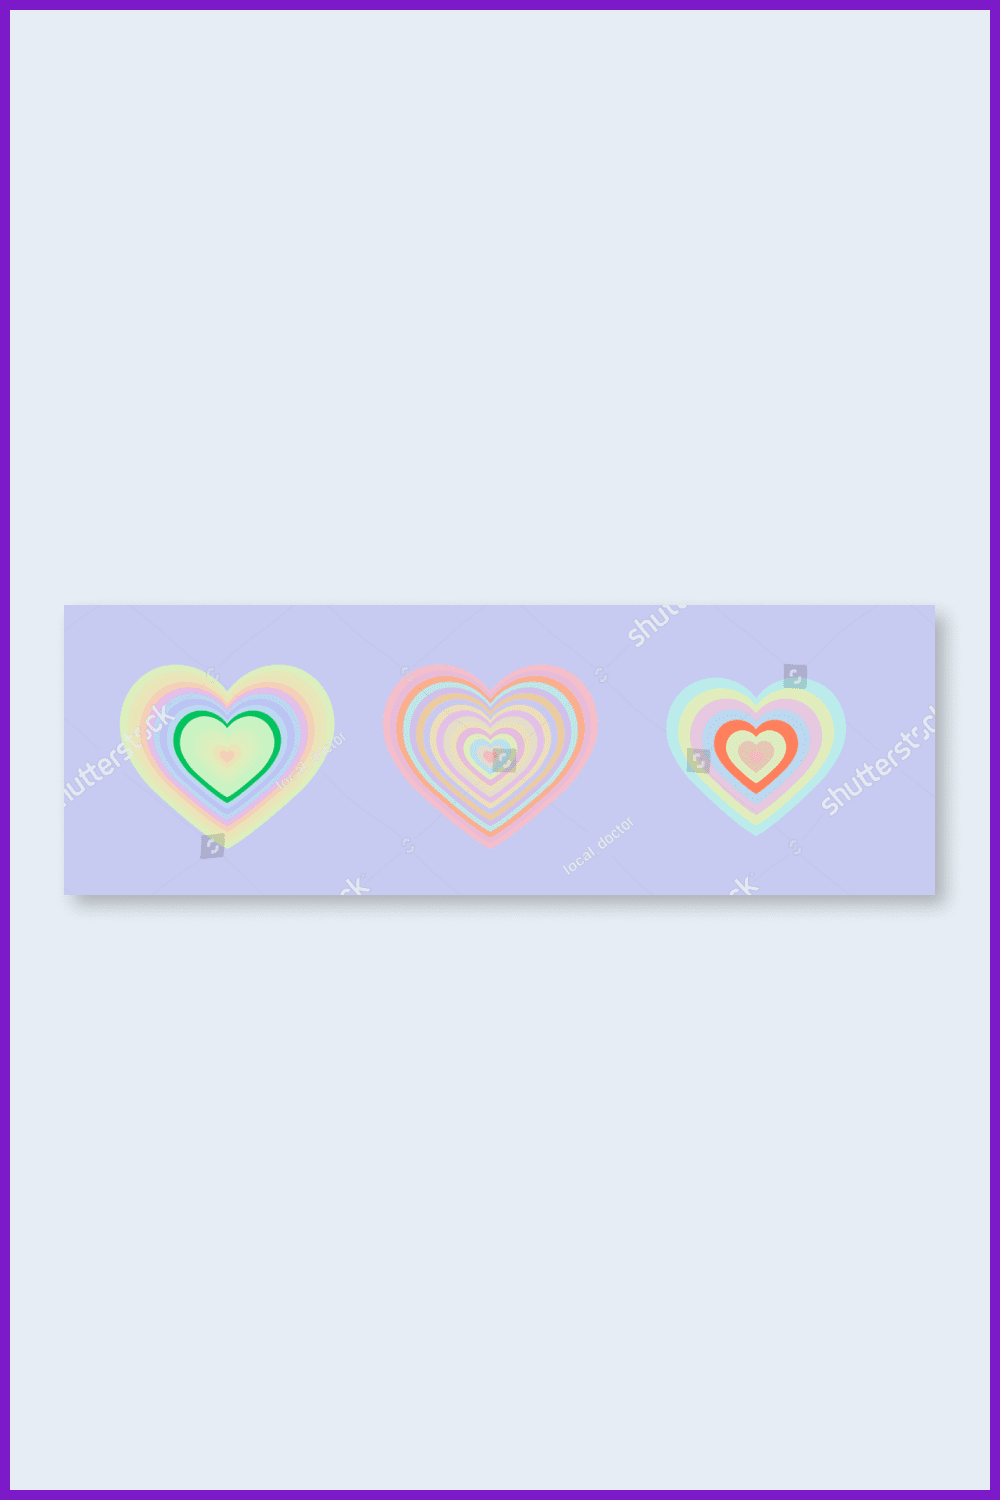 Tunnel of Concentric hearts in pastel colors.